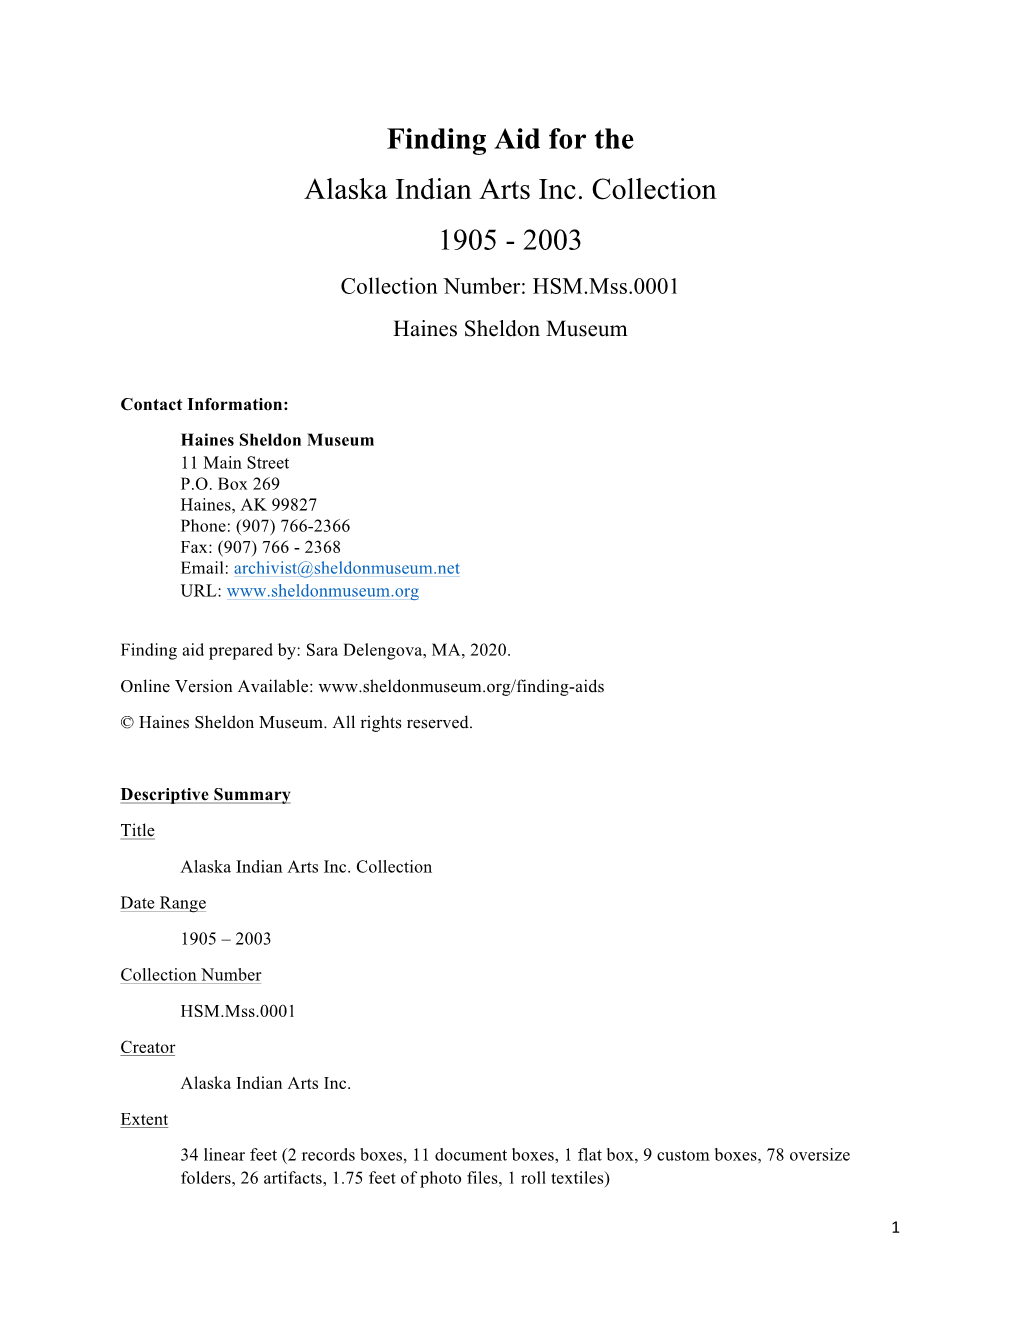 Finding Aid for the Alaska Indian Arts Inc